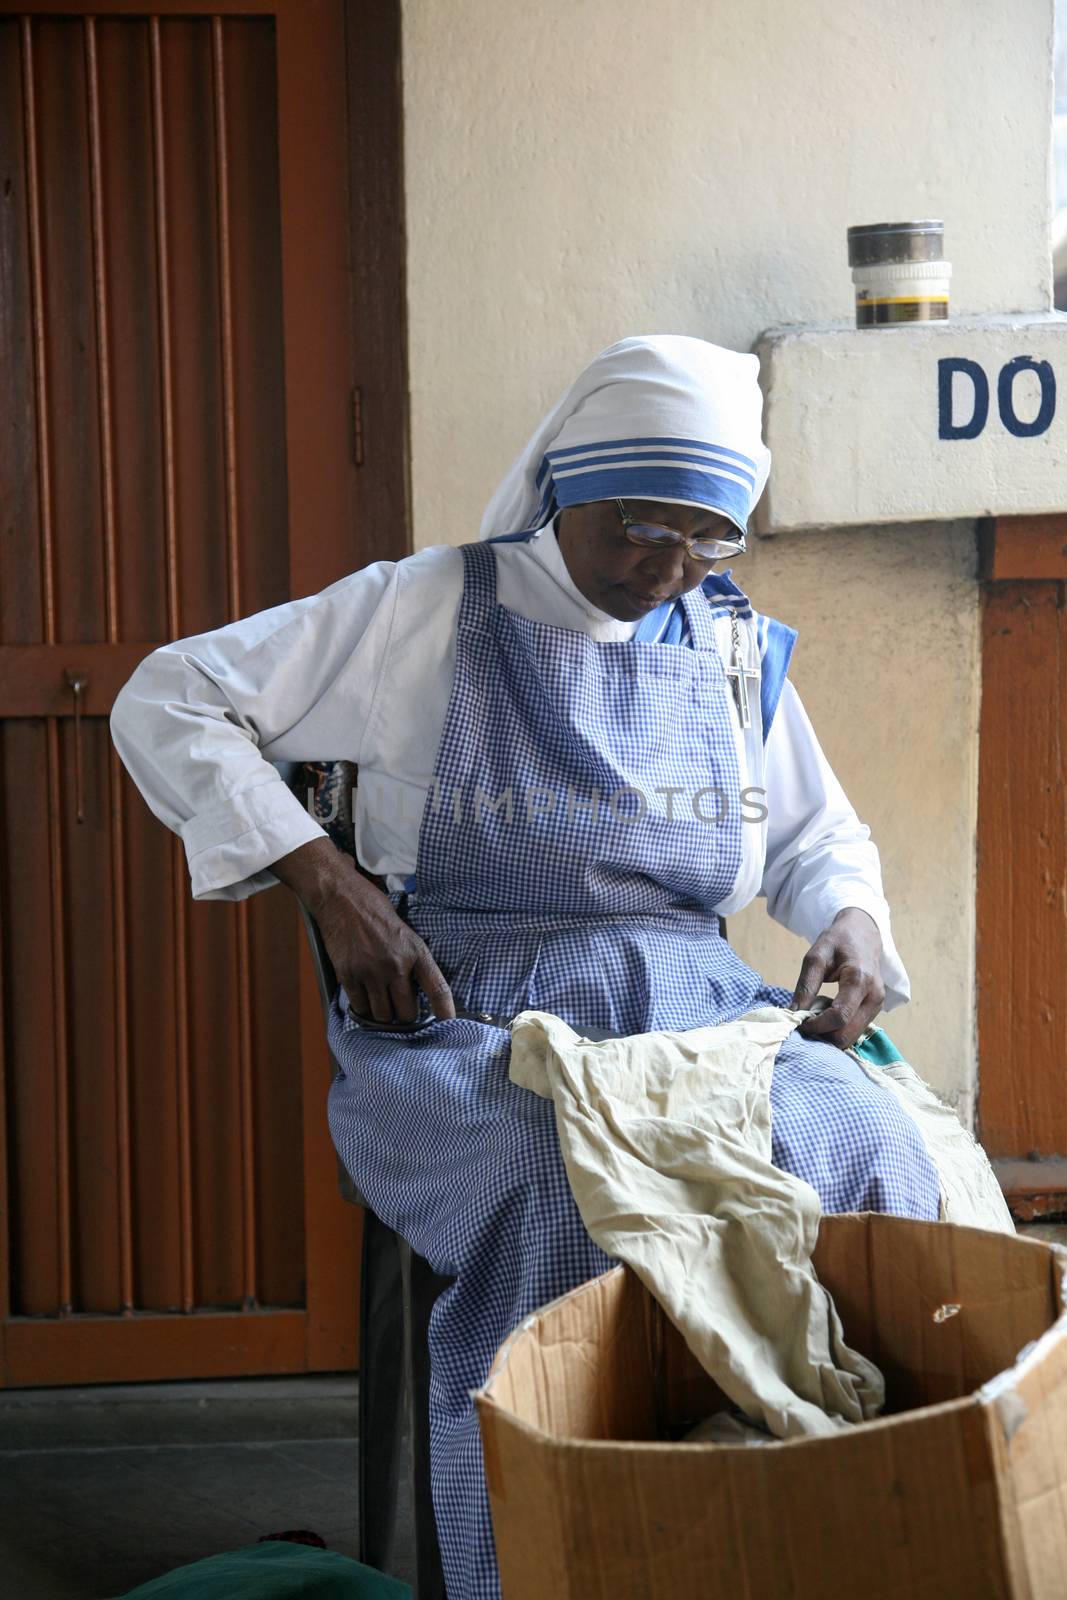 Sister of Missionaries of Charity classified the goods they have received from charitable organizations by atlas